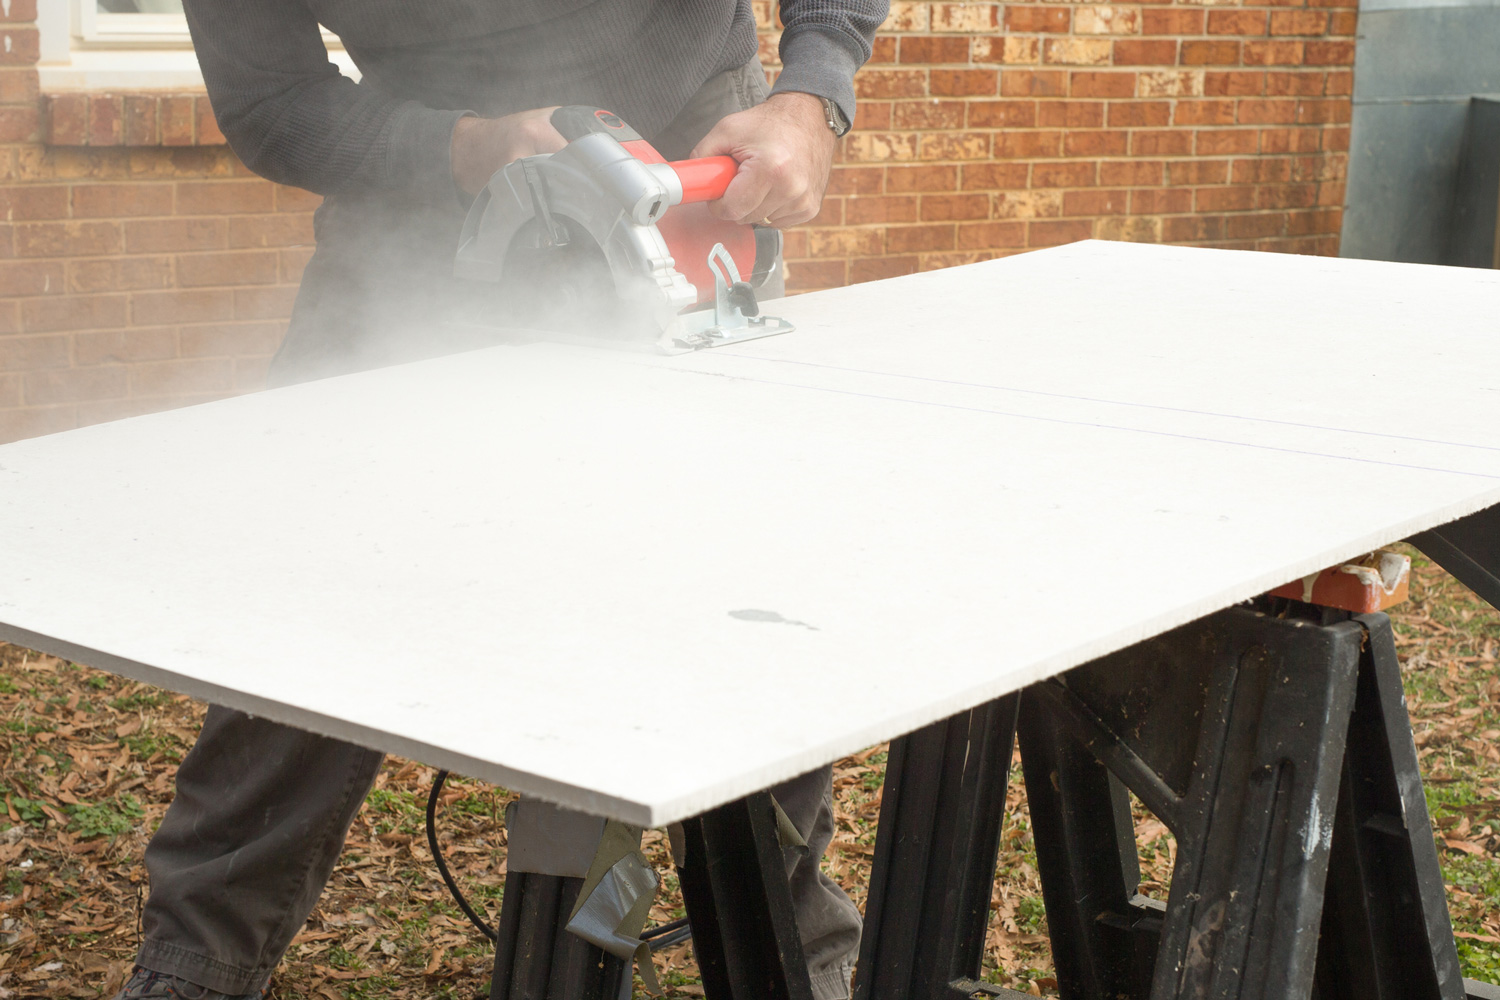 As the circular saw blade cuts into the cement board, dust creates clouds.